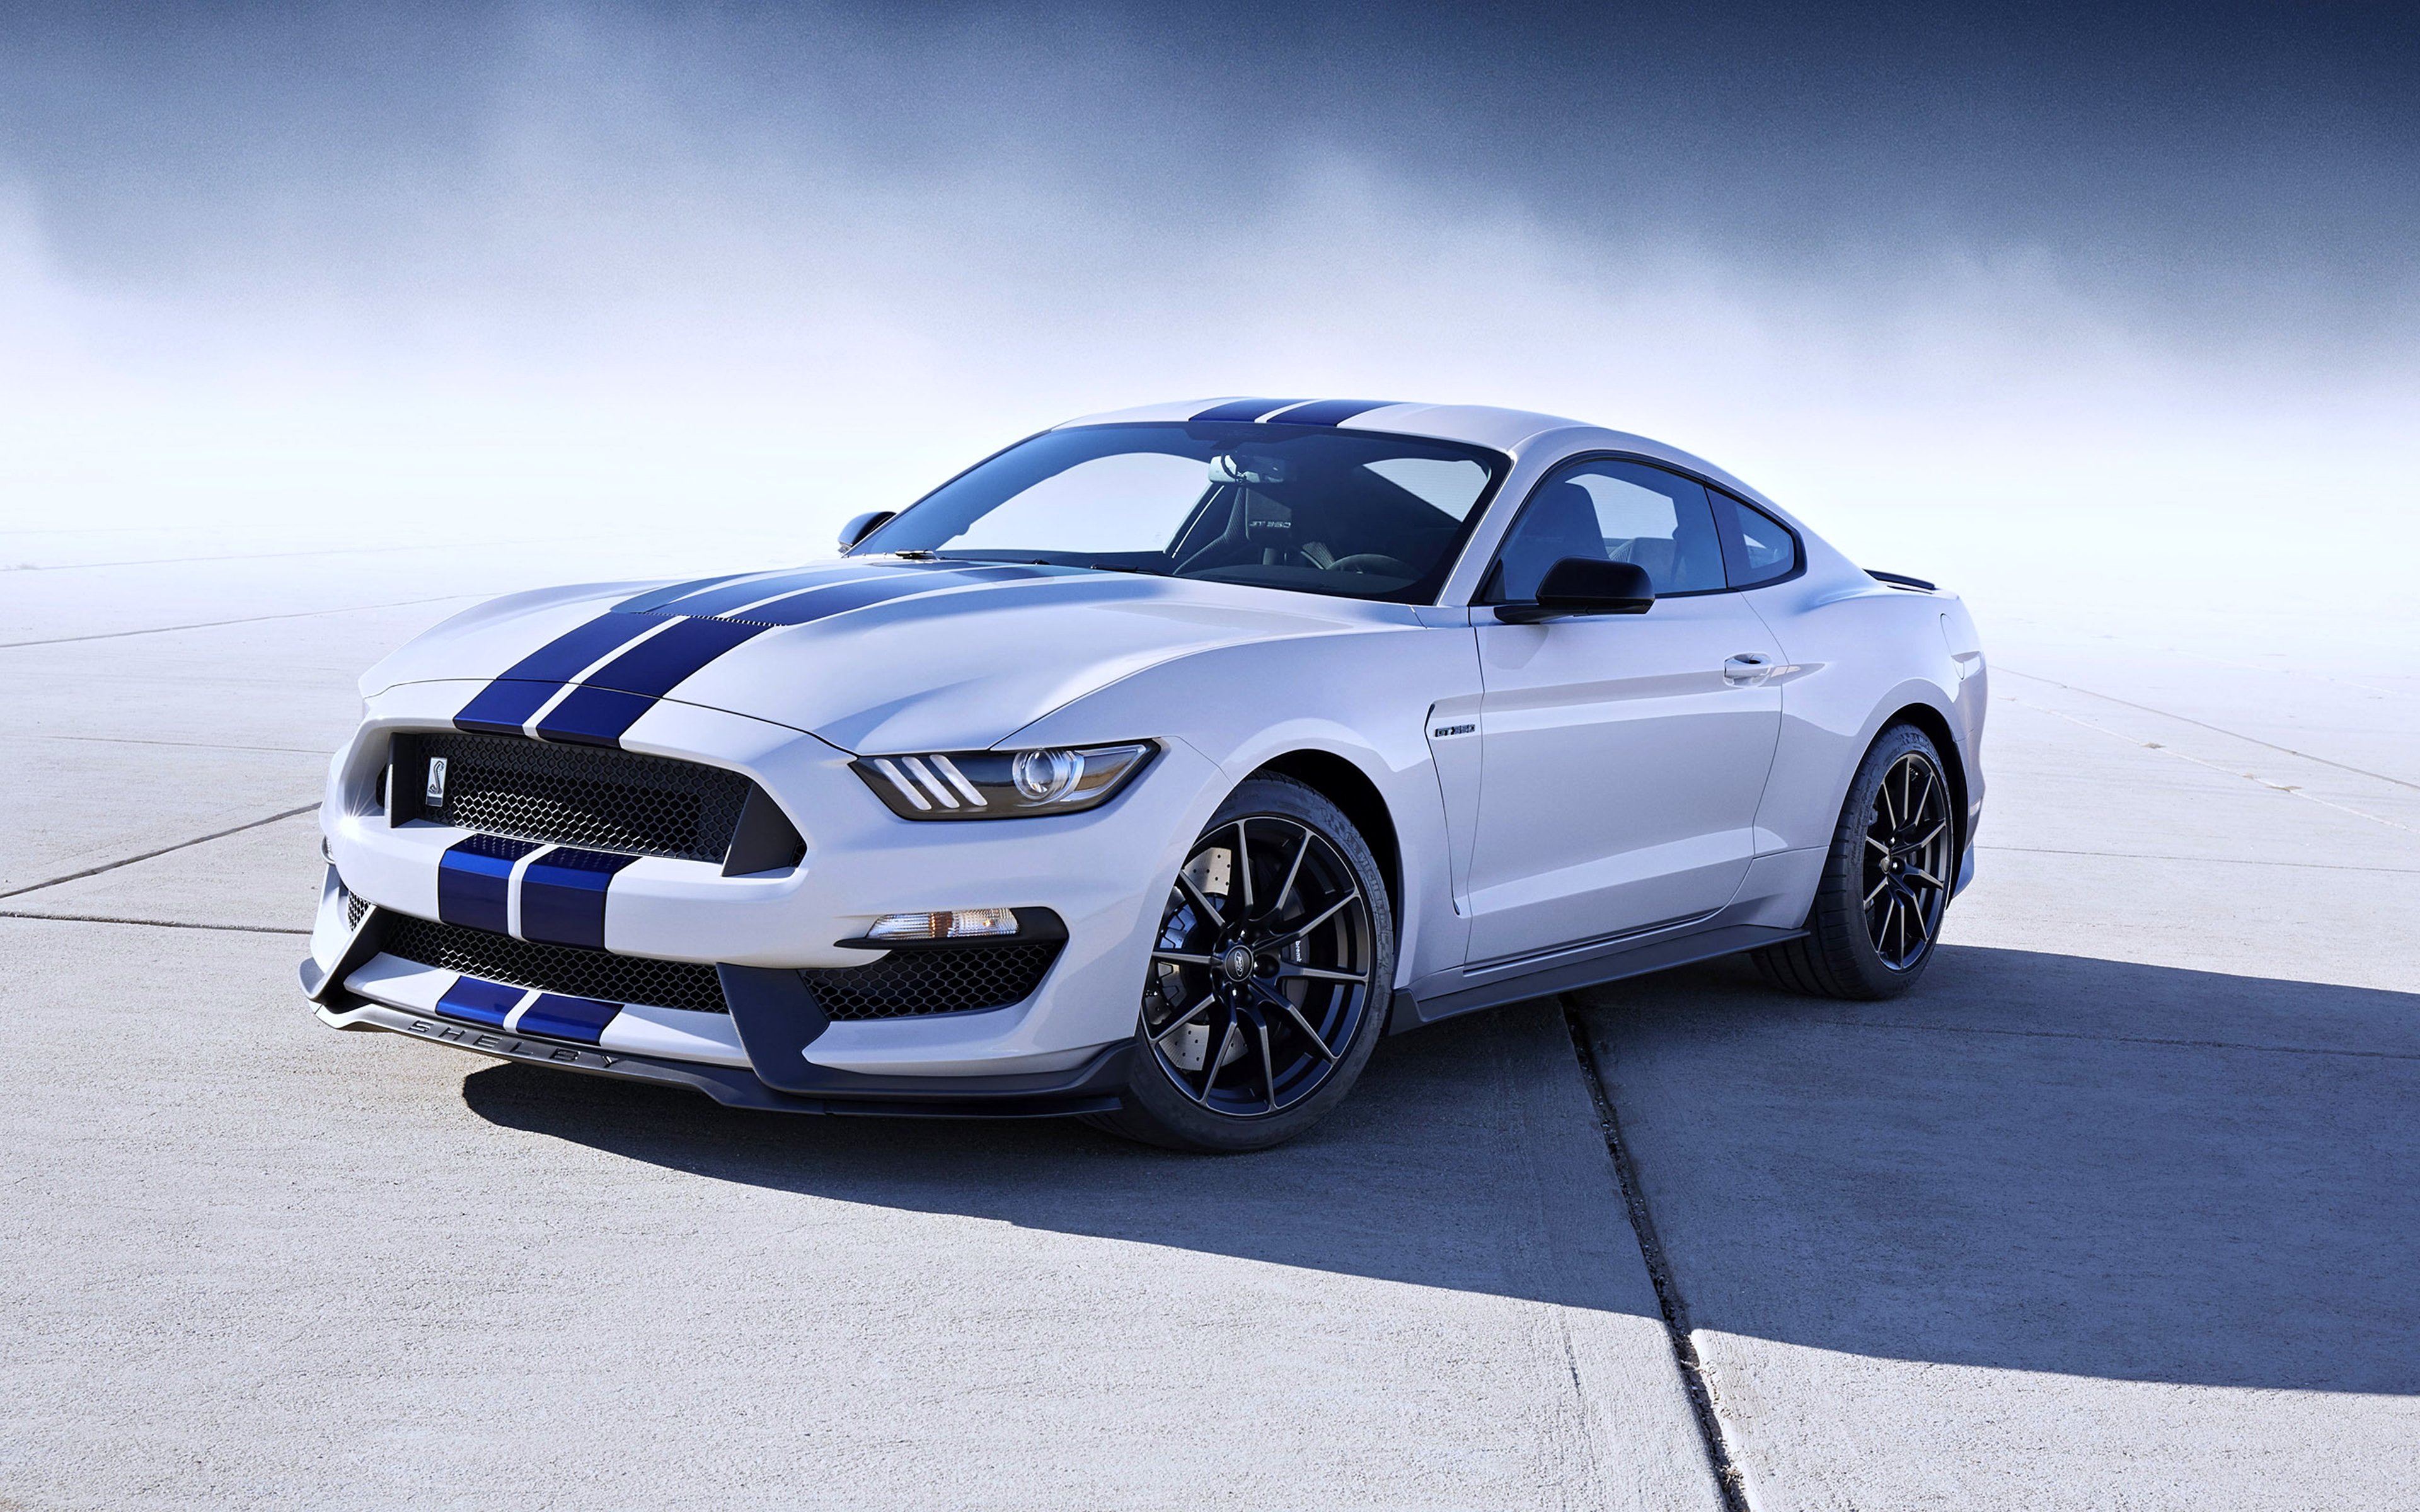 2016, Ford mustang, Shelby, Gt350, Cars, Speed, Race, Motors, Super Wallpaper